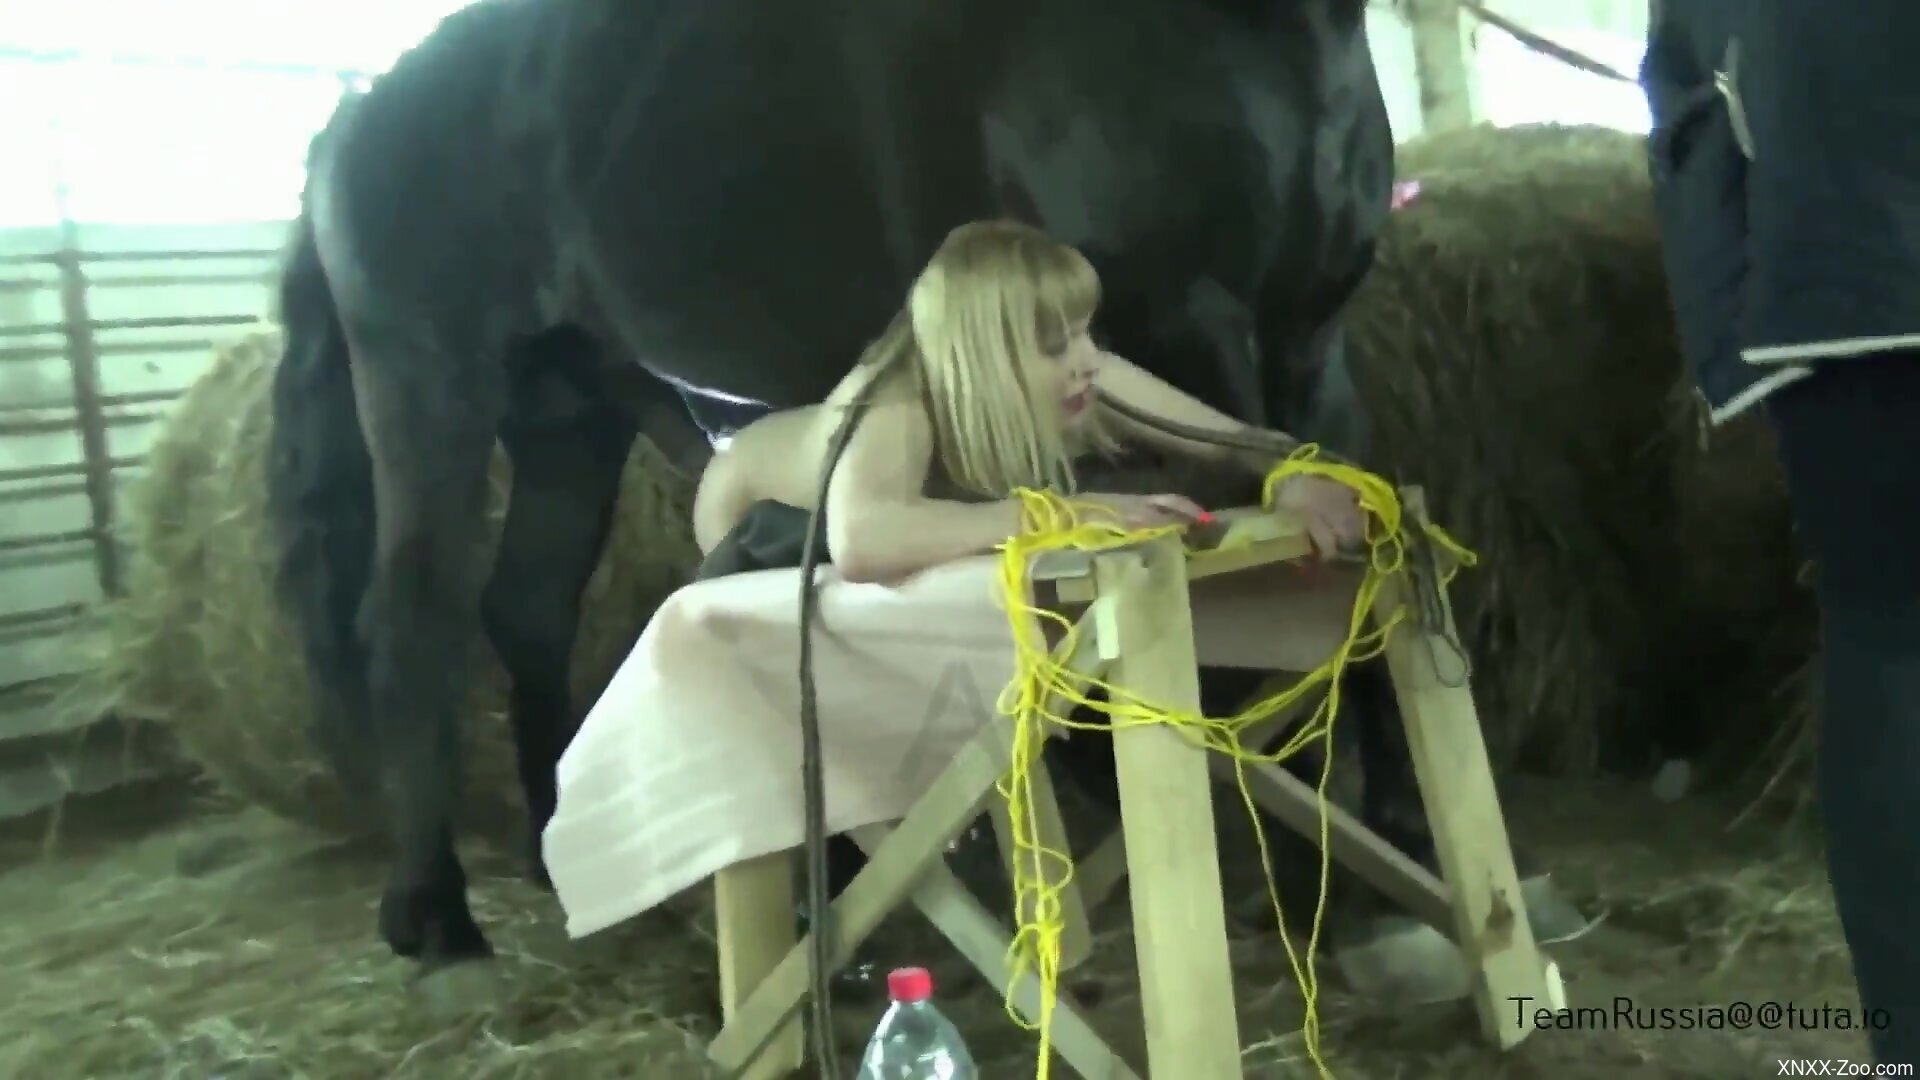 Horsh Xnxx - Tied blonde moans with a horse cock splitting her in two